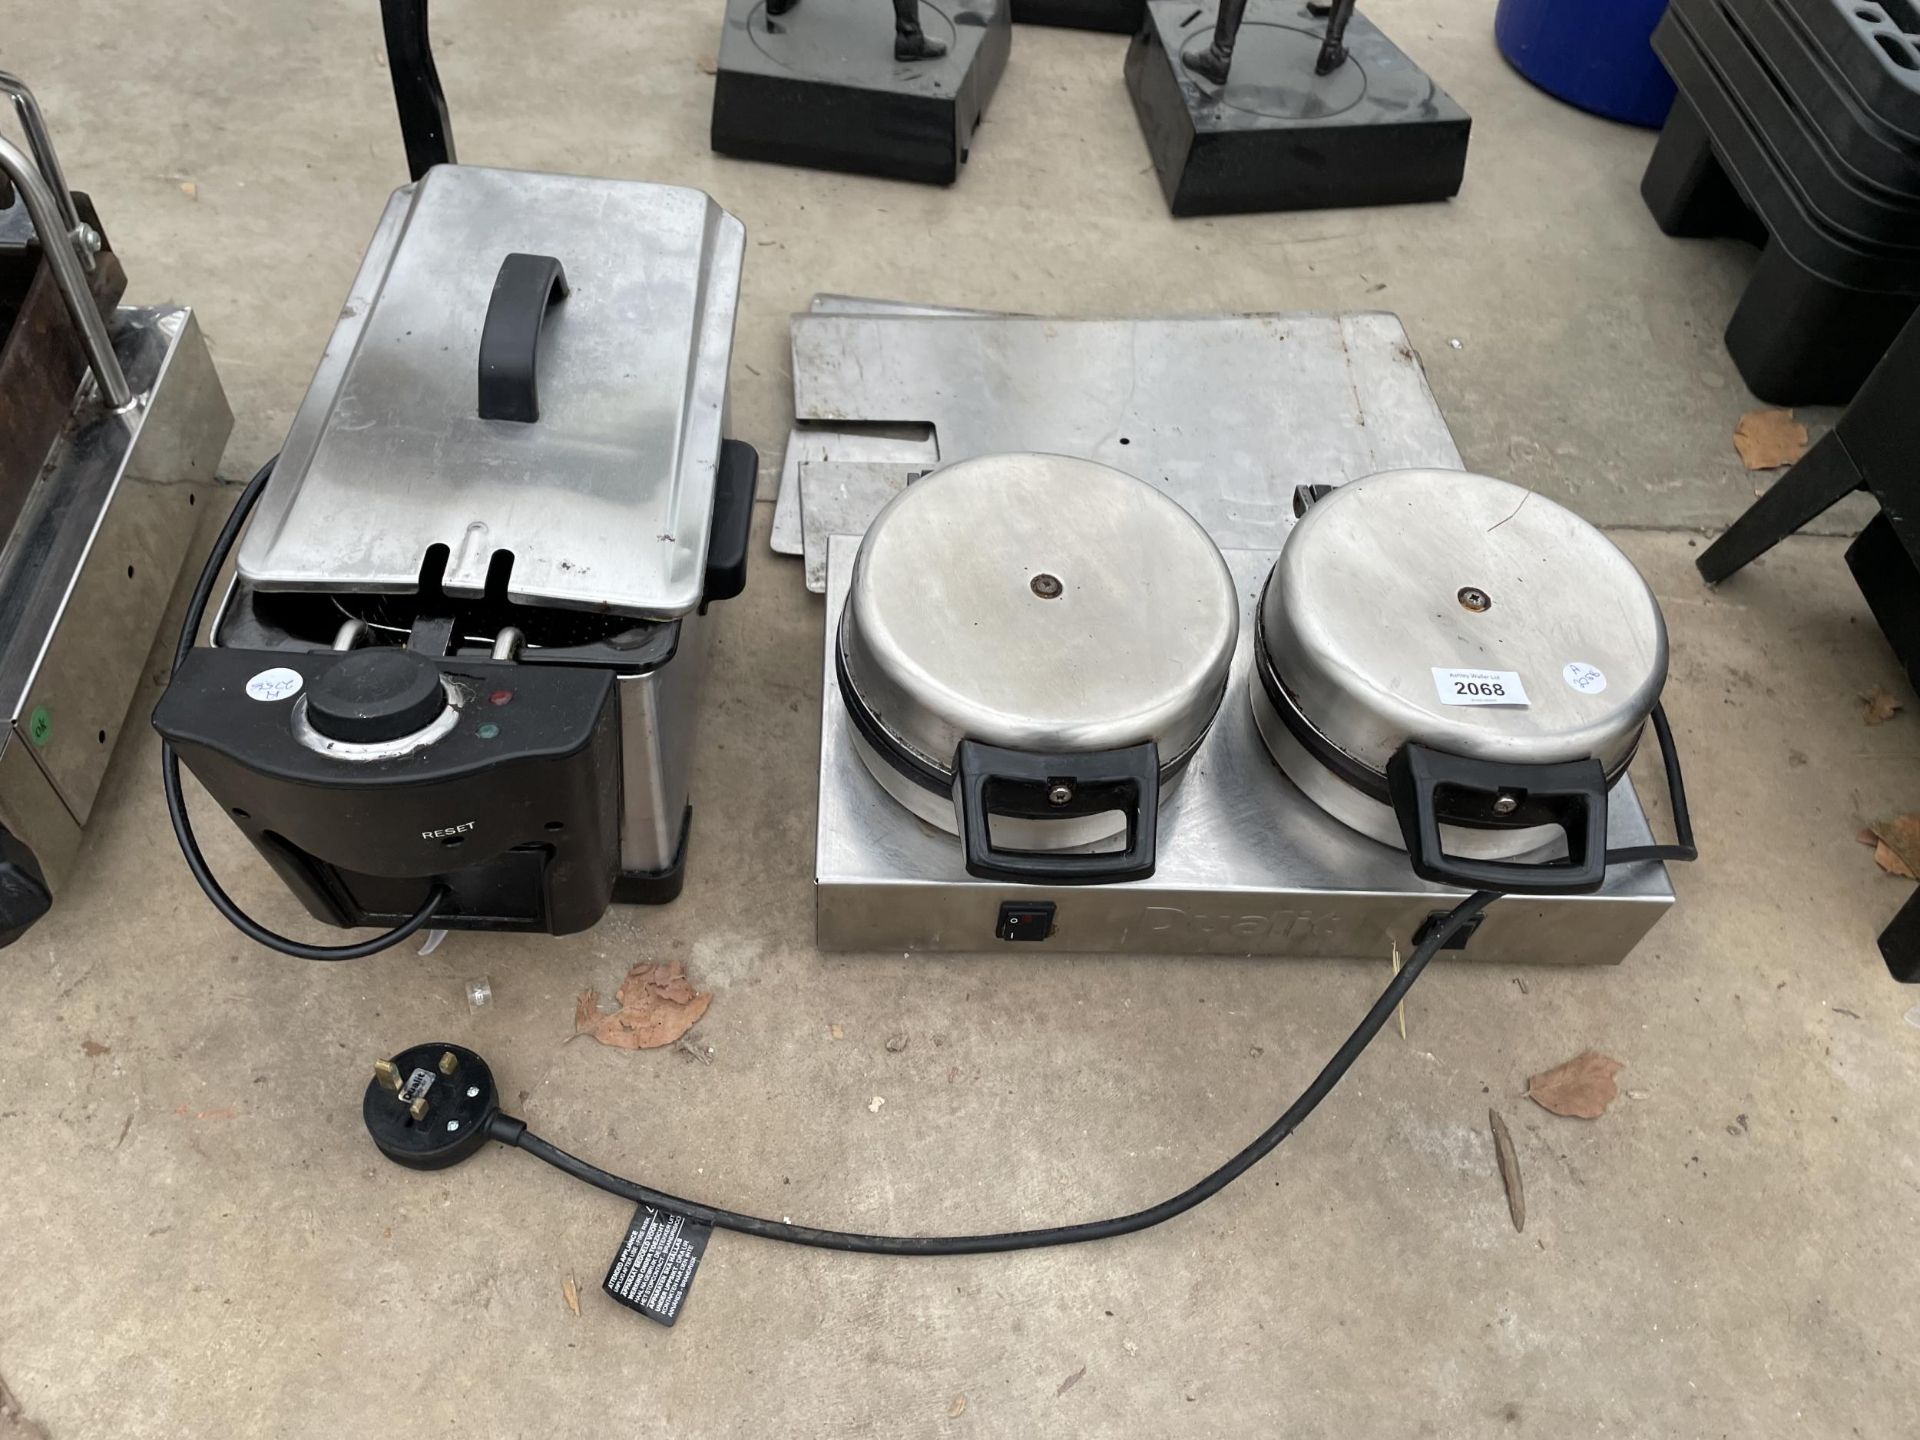 A TWO RING WAFFLE MAKER AND A DEEP FAT FRYER